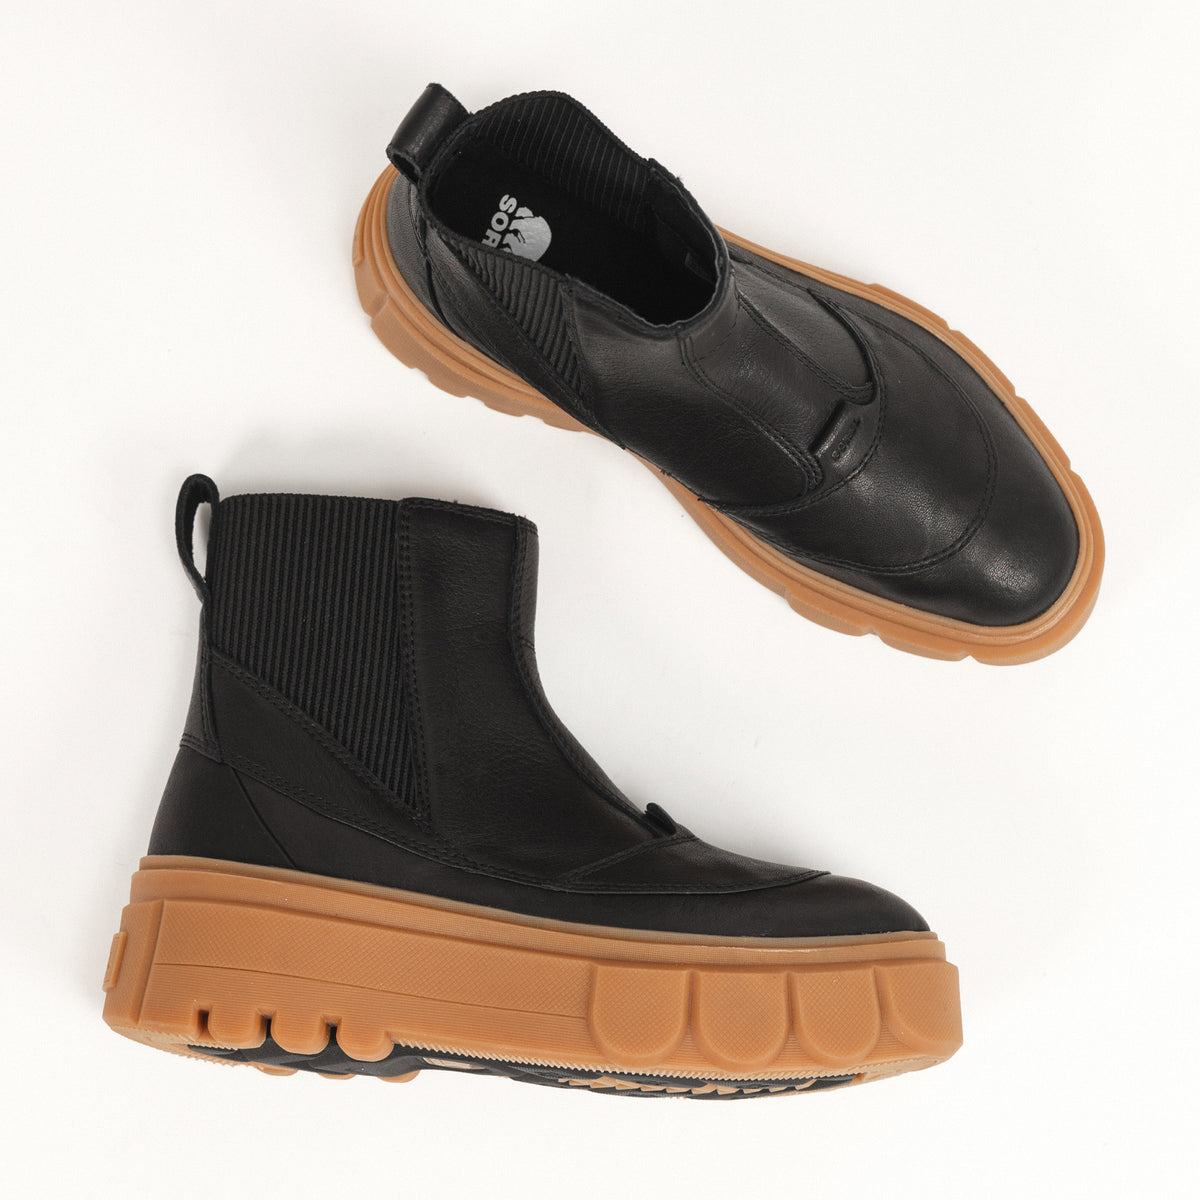 CARIBOU X BOOT CHELSEA - BLACK - LEATHER